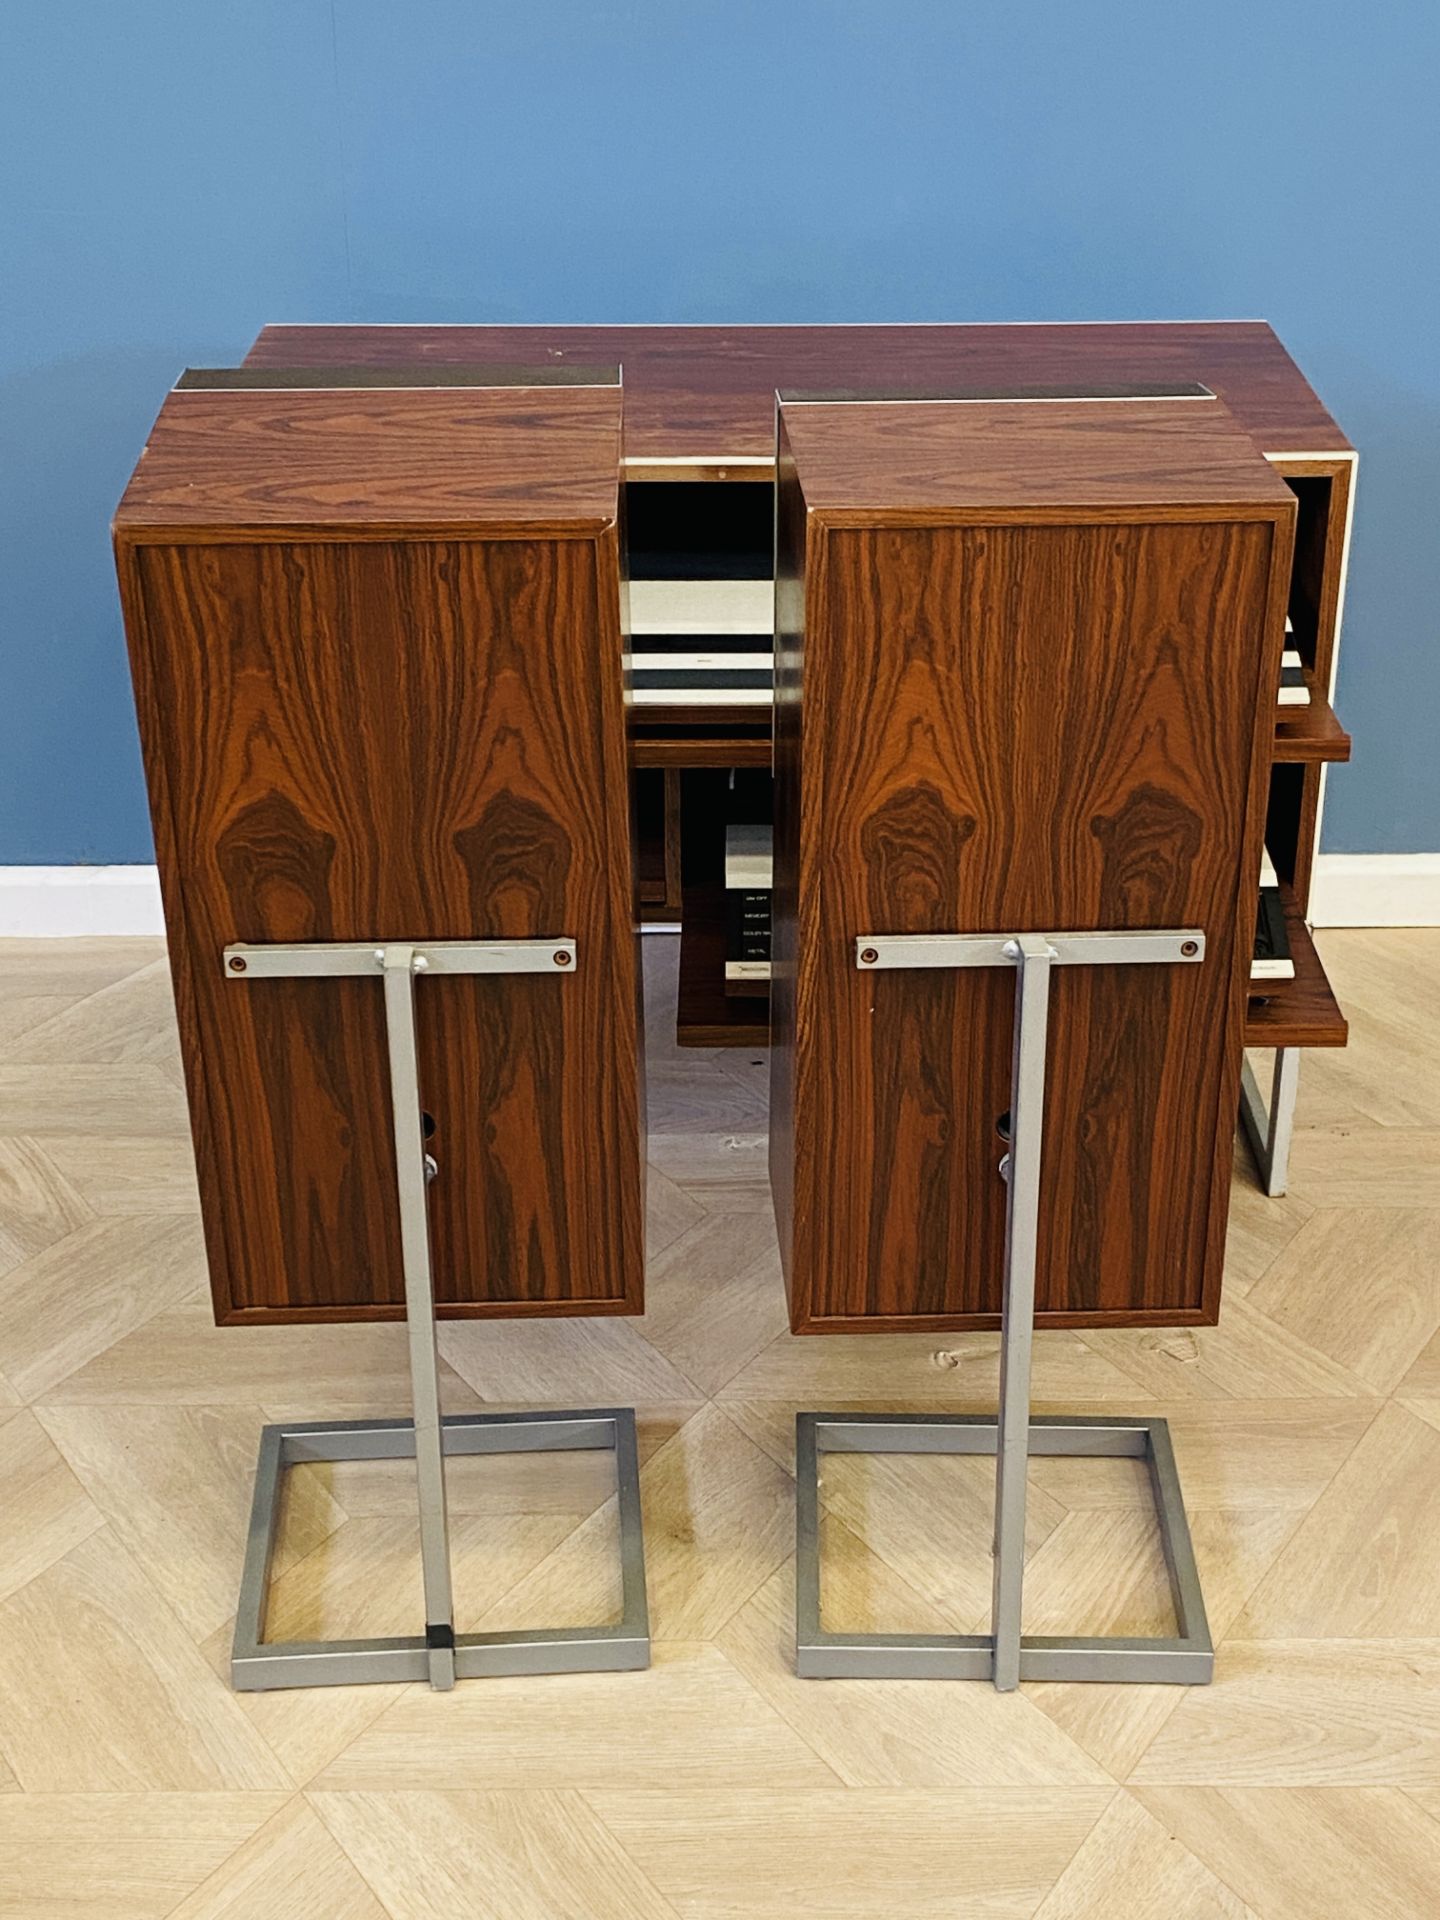 Bang & Olufsen Beomaster 1900-2; Beocord 2400, Beogram 2200 on stand; & Beovox S50's - Image 9 of 9